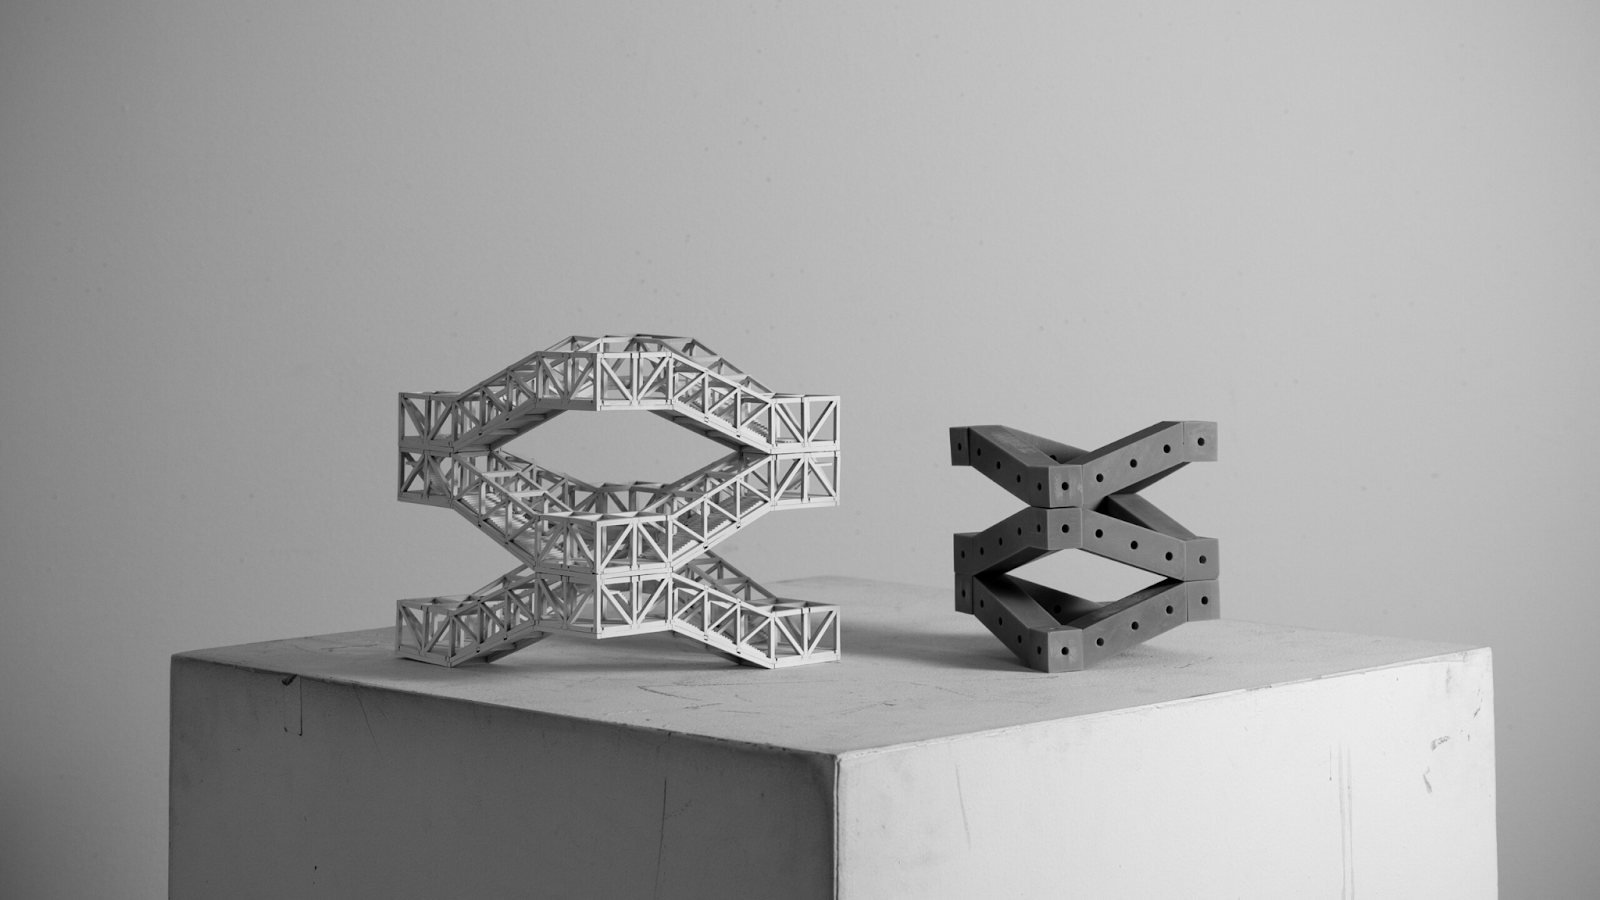 Prototypical building components visualised using generative design